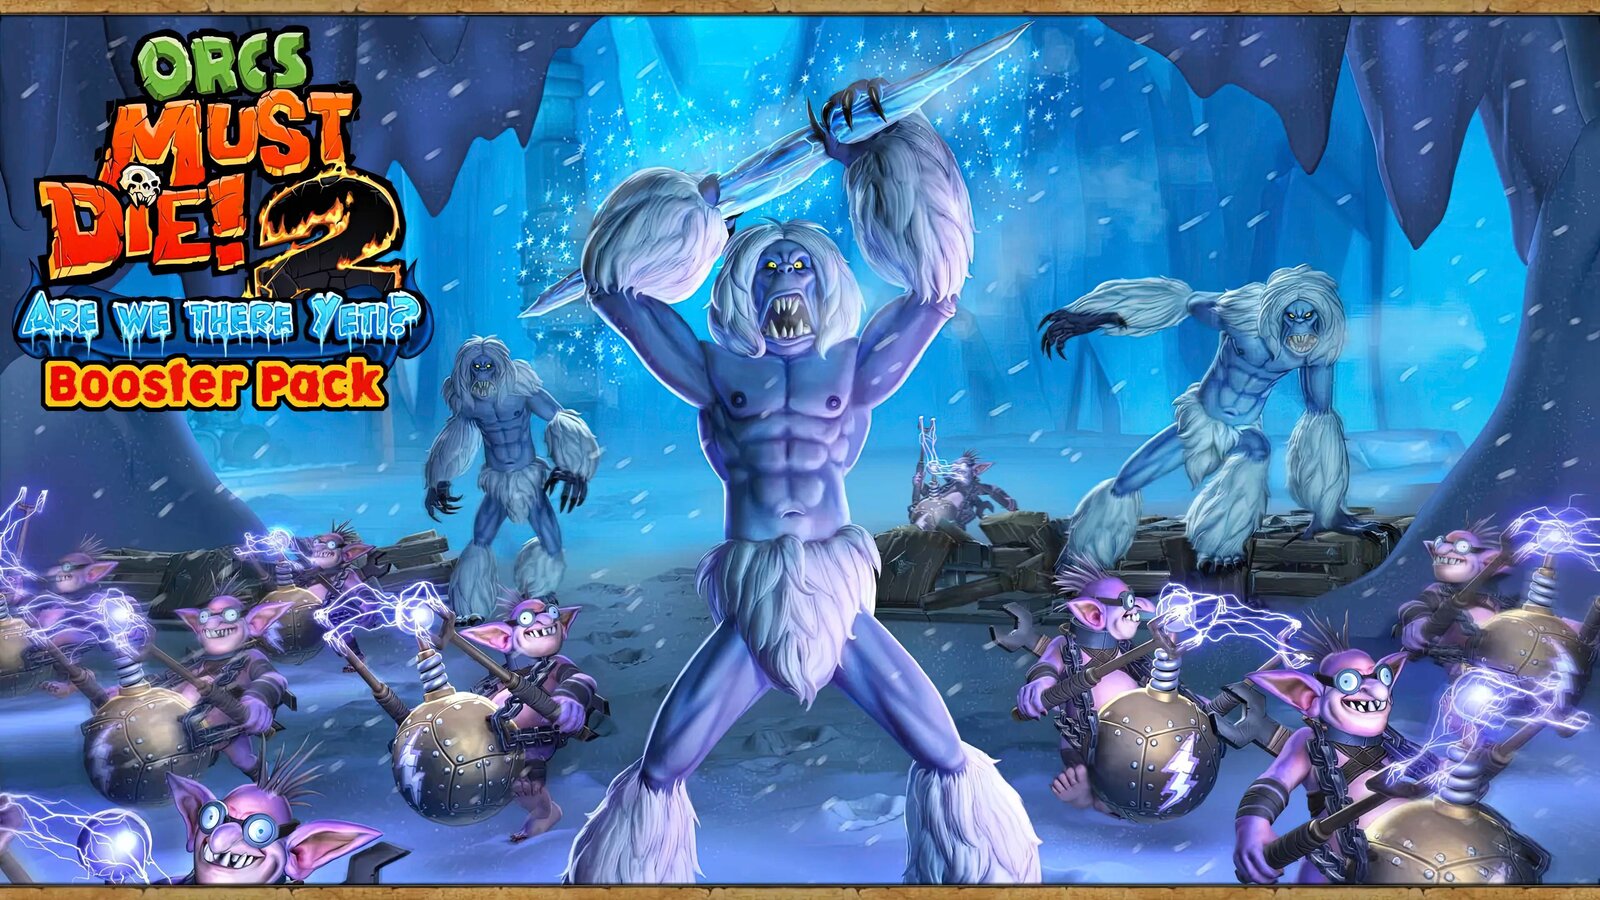 Orcs Must Die! 2 - Are We There Yeti? - Booster Pack